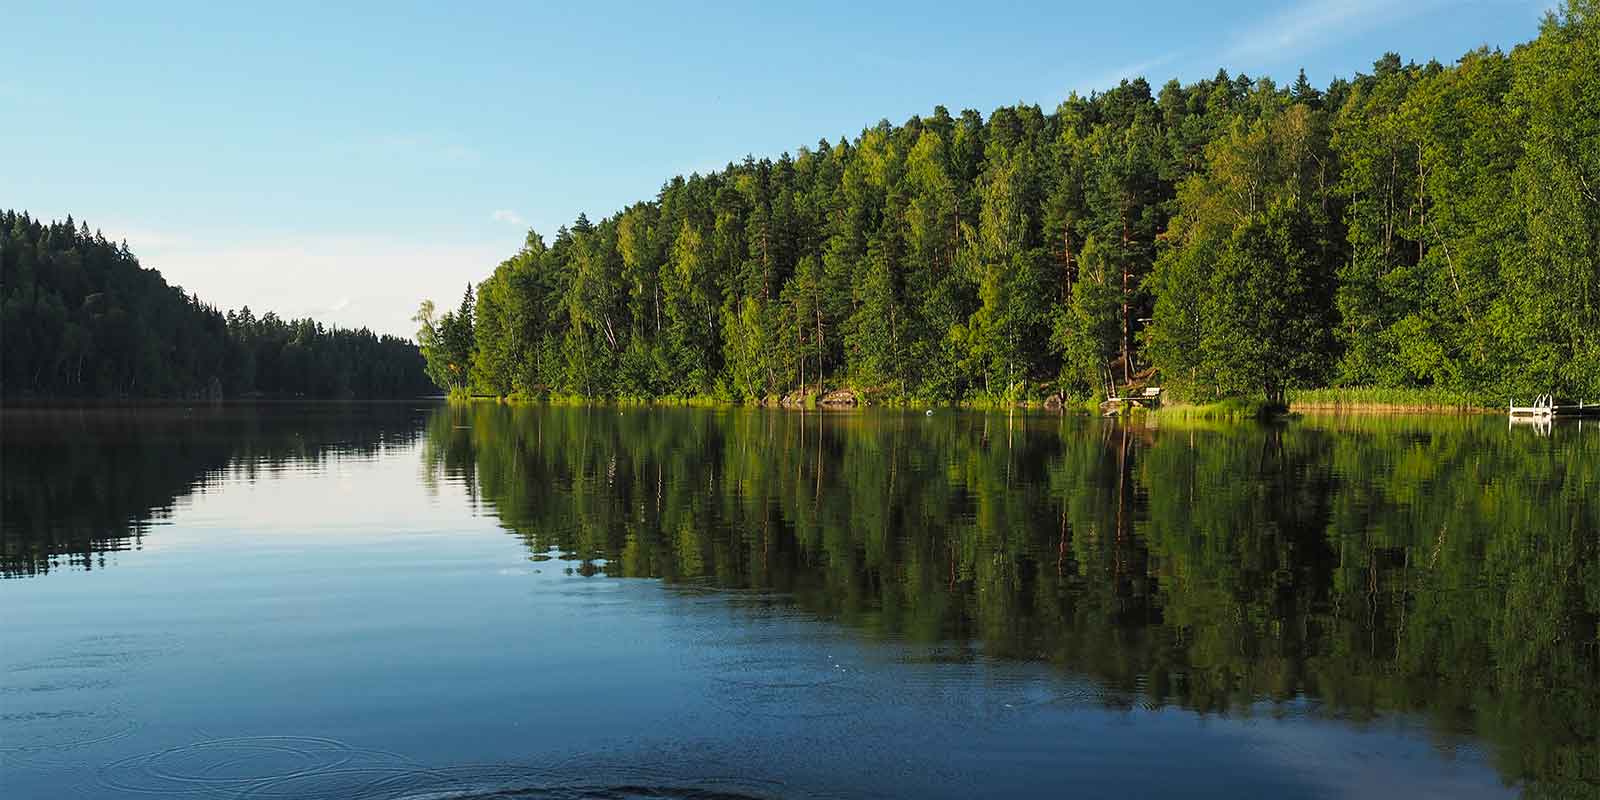 Calm lake in Hossa surrounded by pine trees